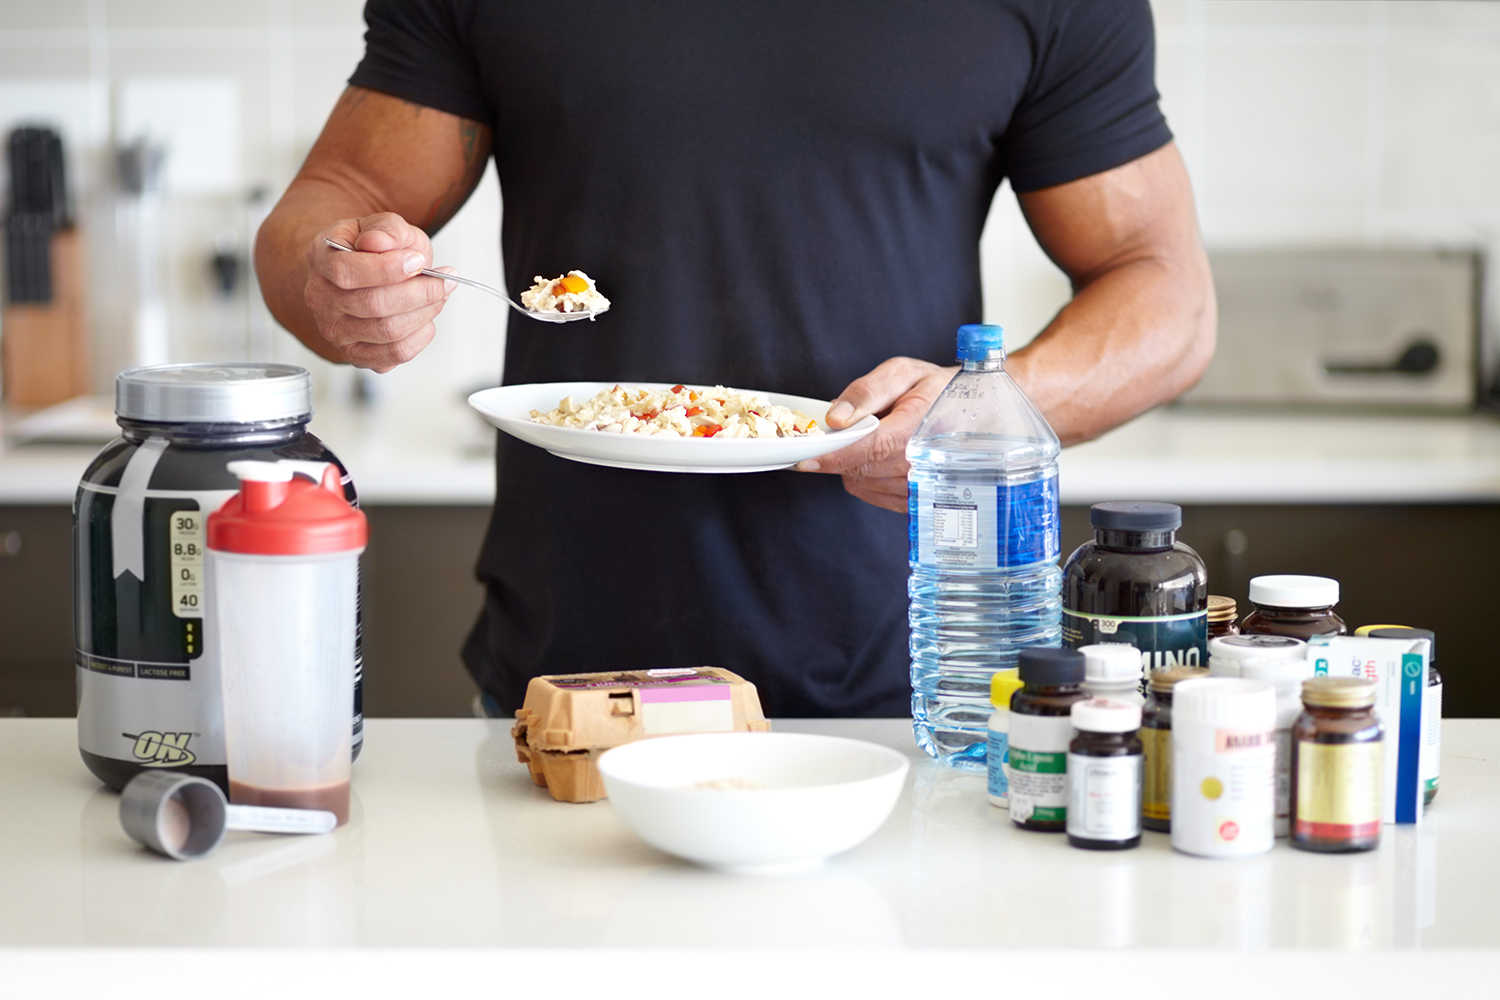 The best pre-workout meals - everything you need to know - The Manual